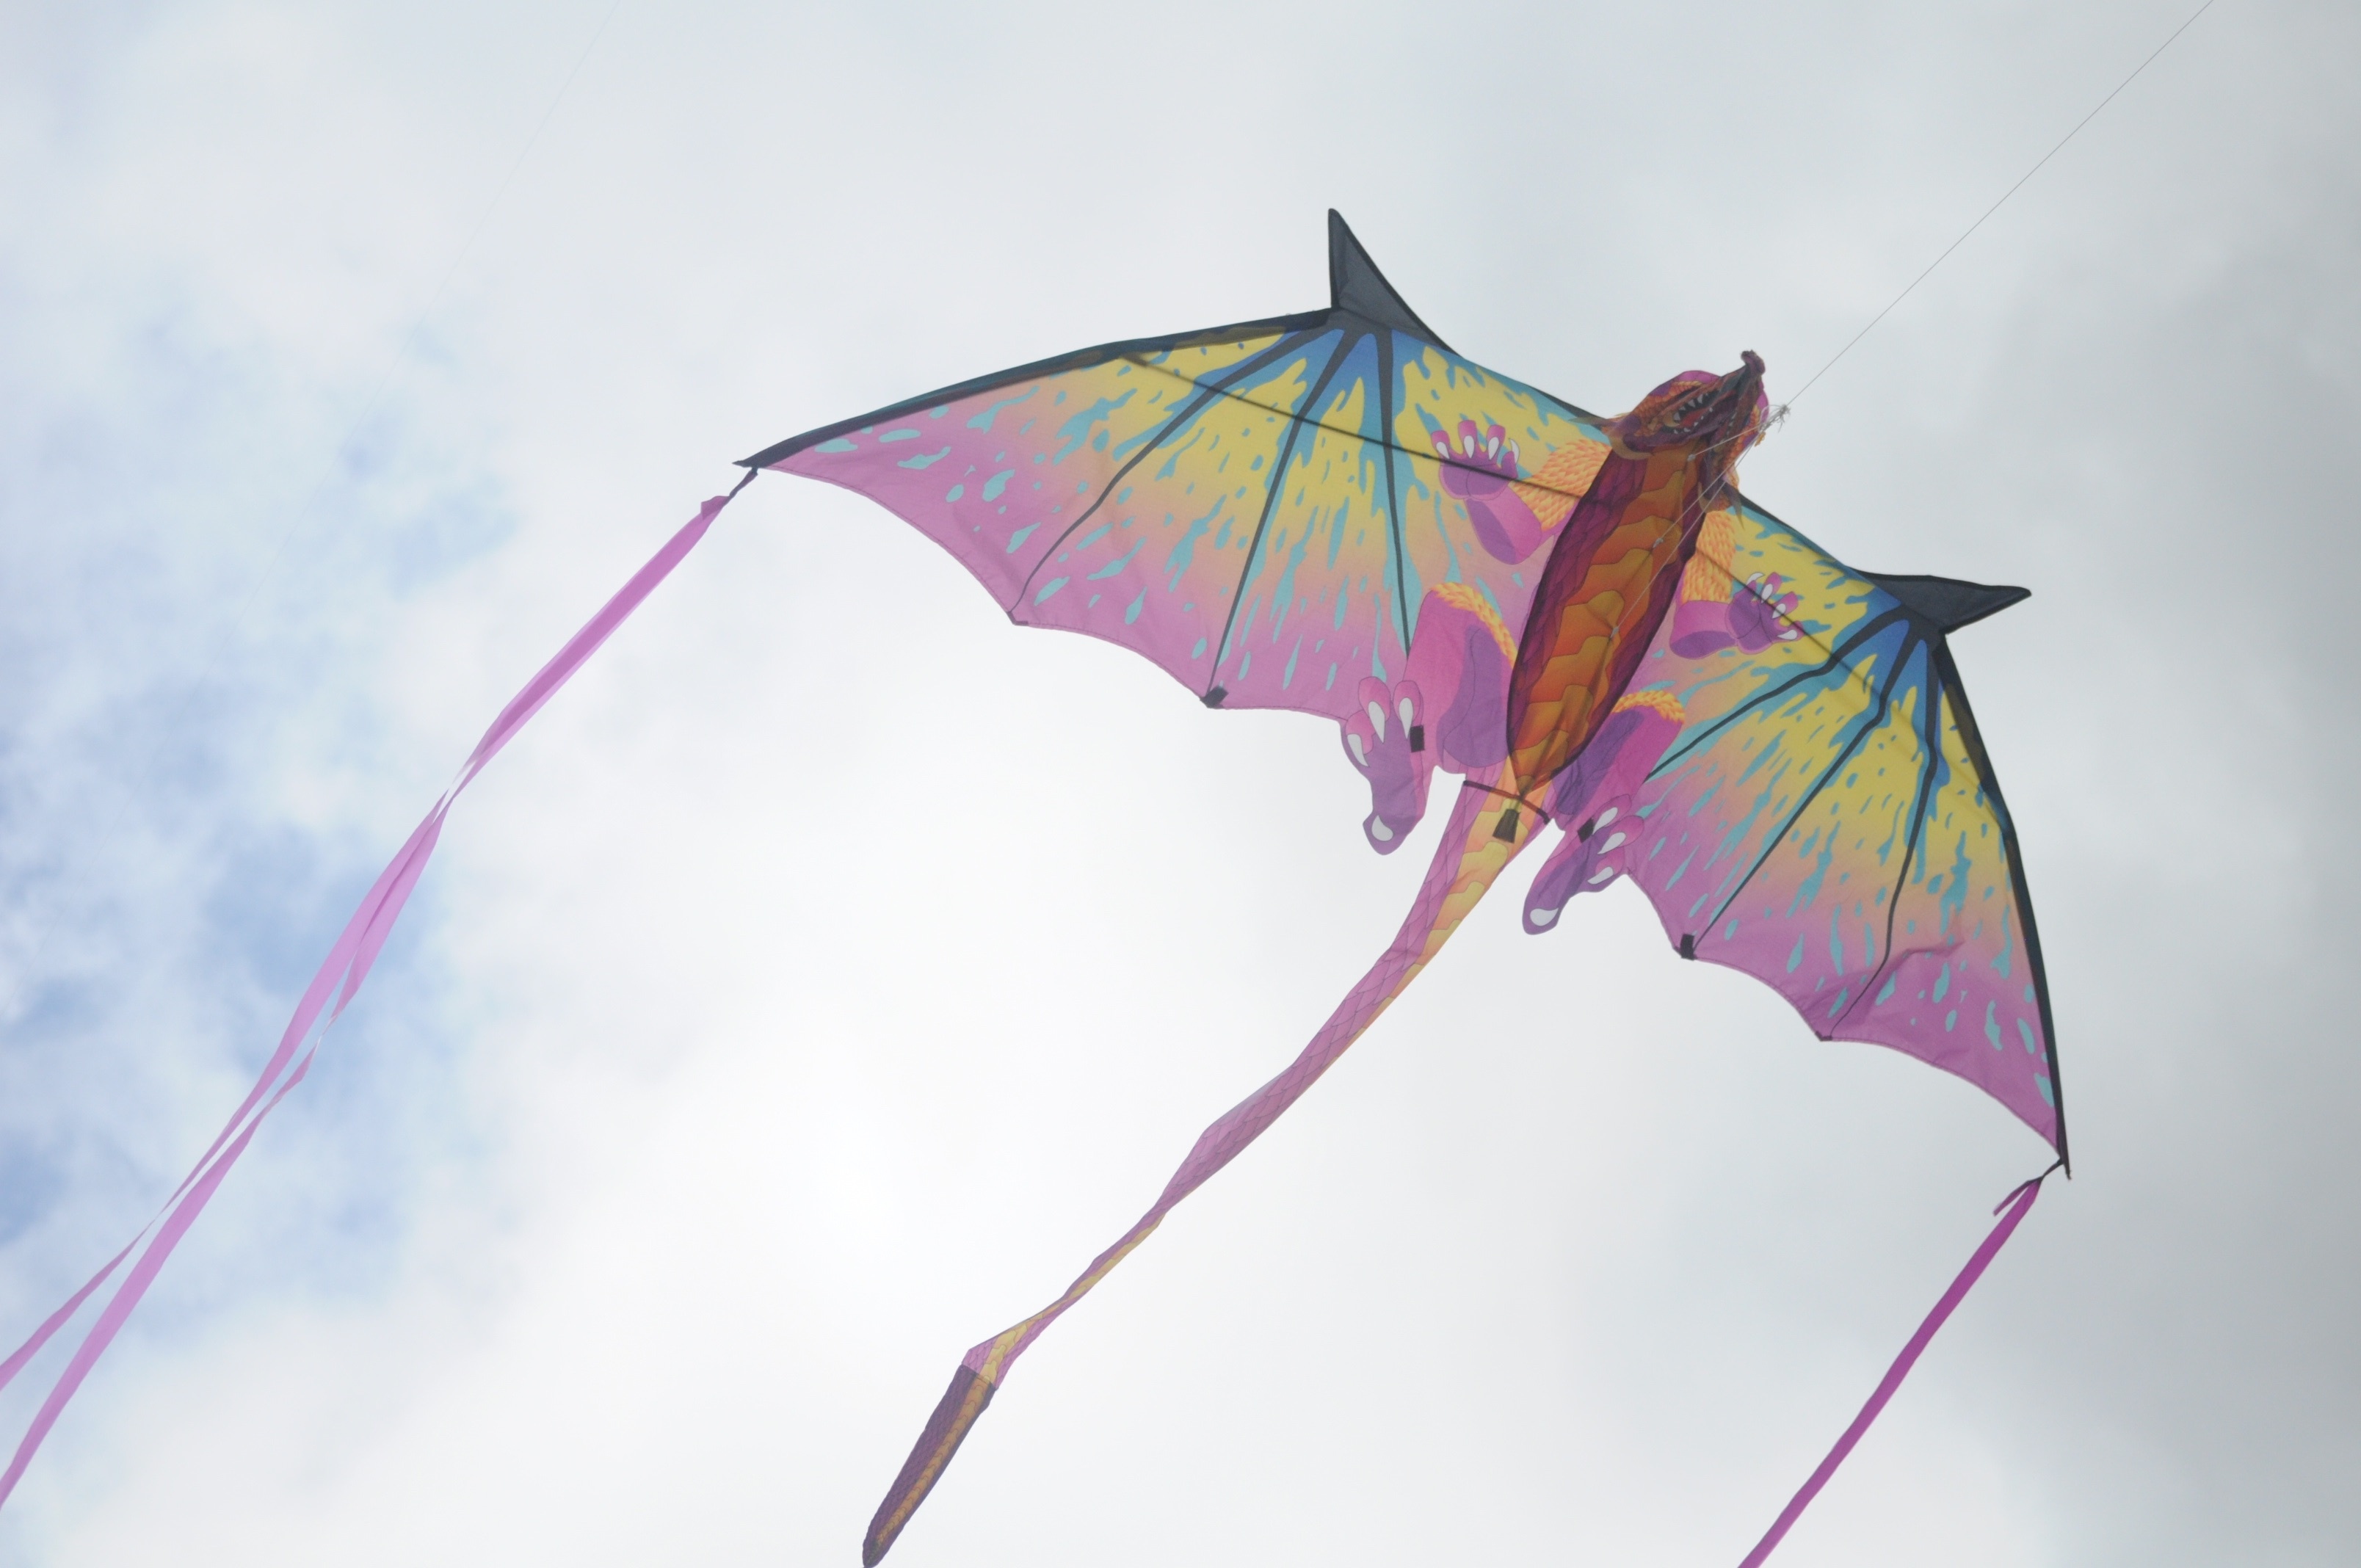 Kite Sports: Dragon kite with a tail, Single line, Windsports, Perfect for kids. 3220x2140 HD Wallpaper.